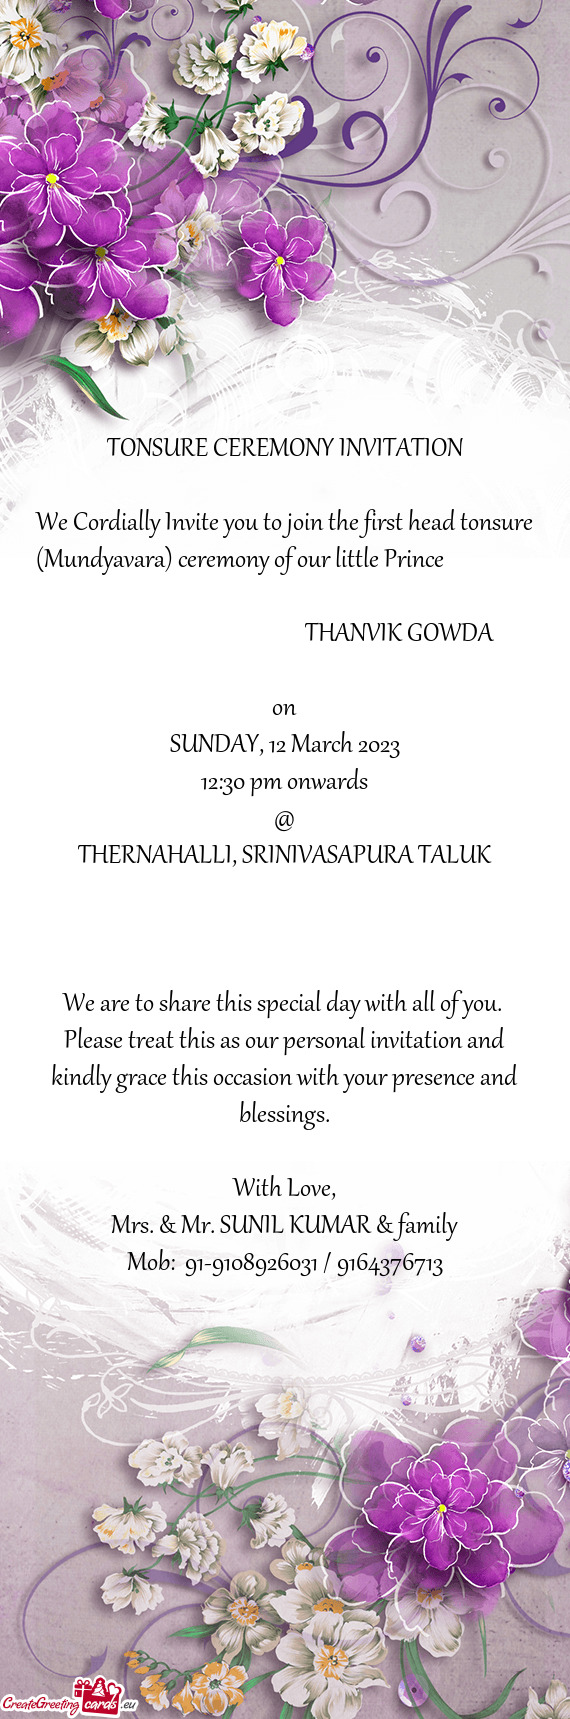 We Cordially Invite you to join the first head tonsure (Mundyavara) ceremony of our little Prince